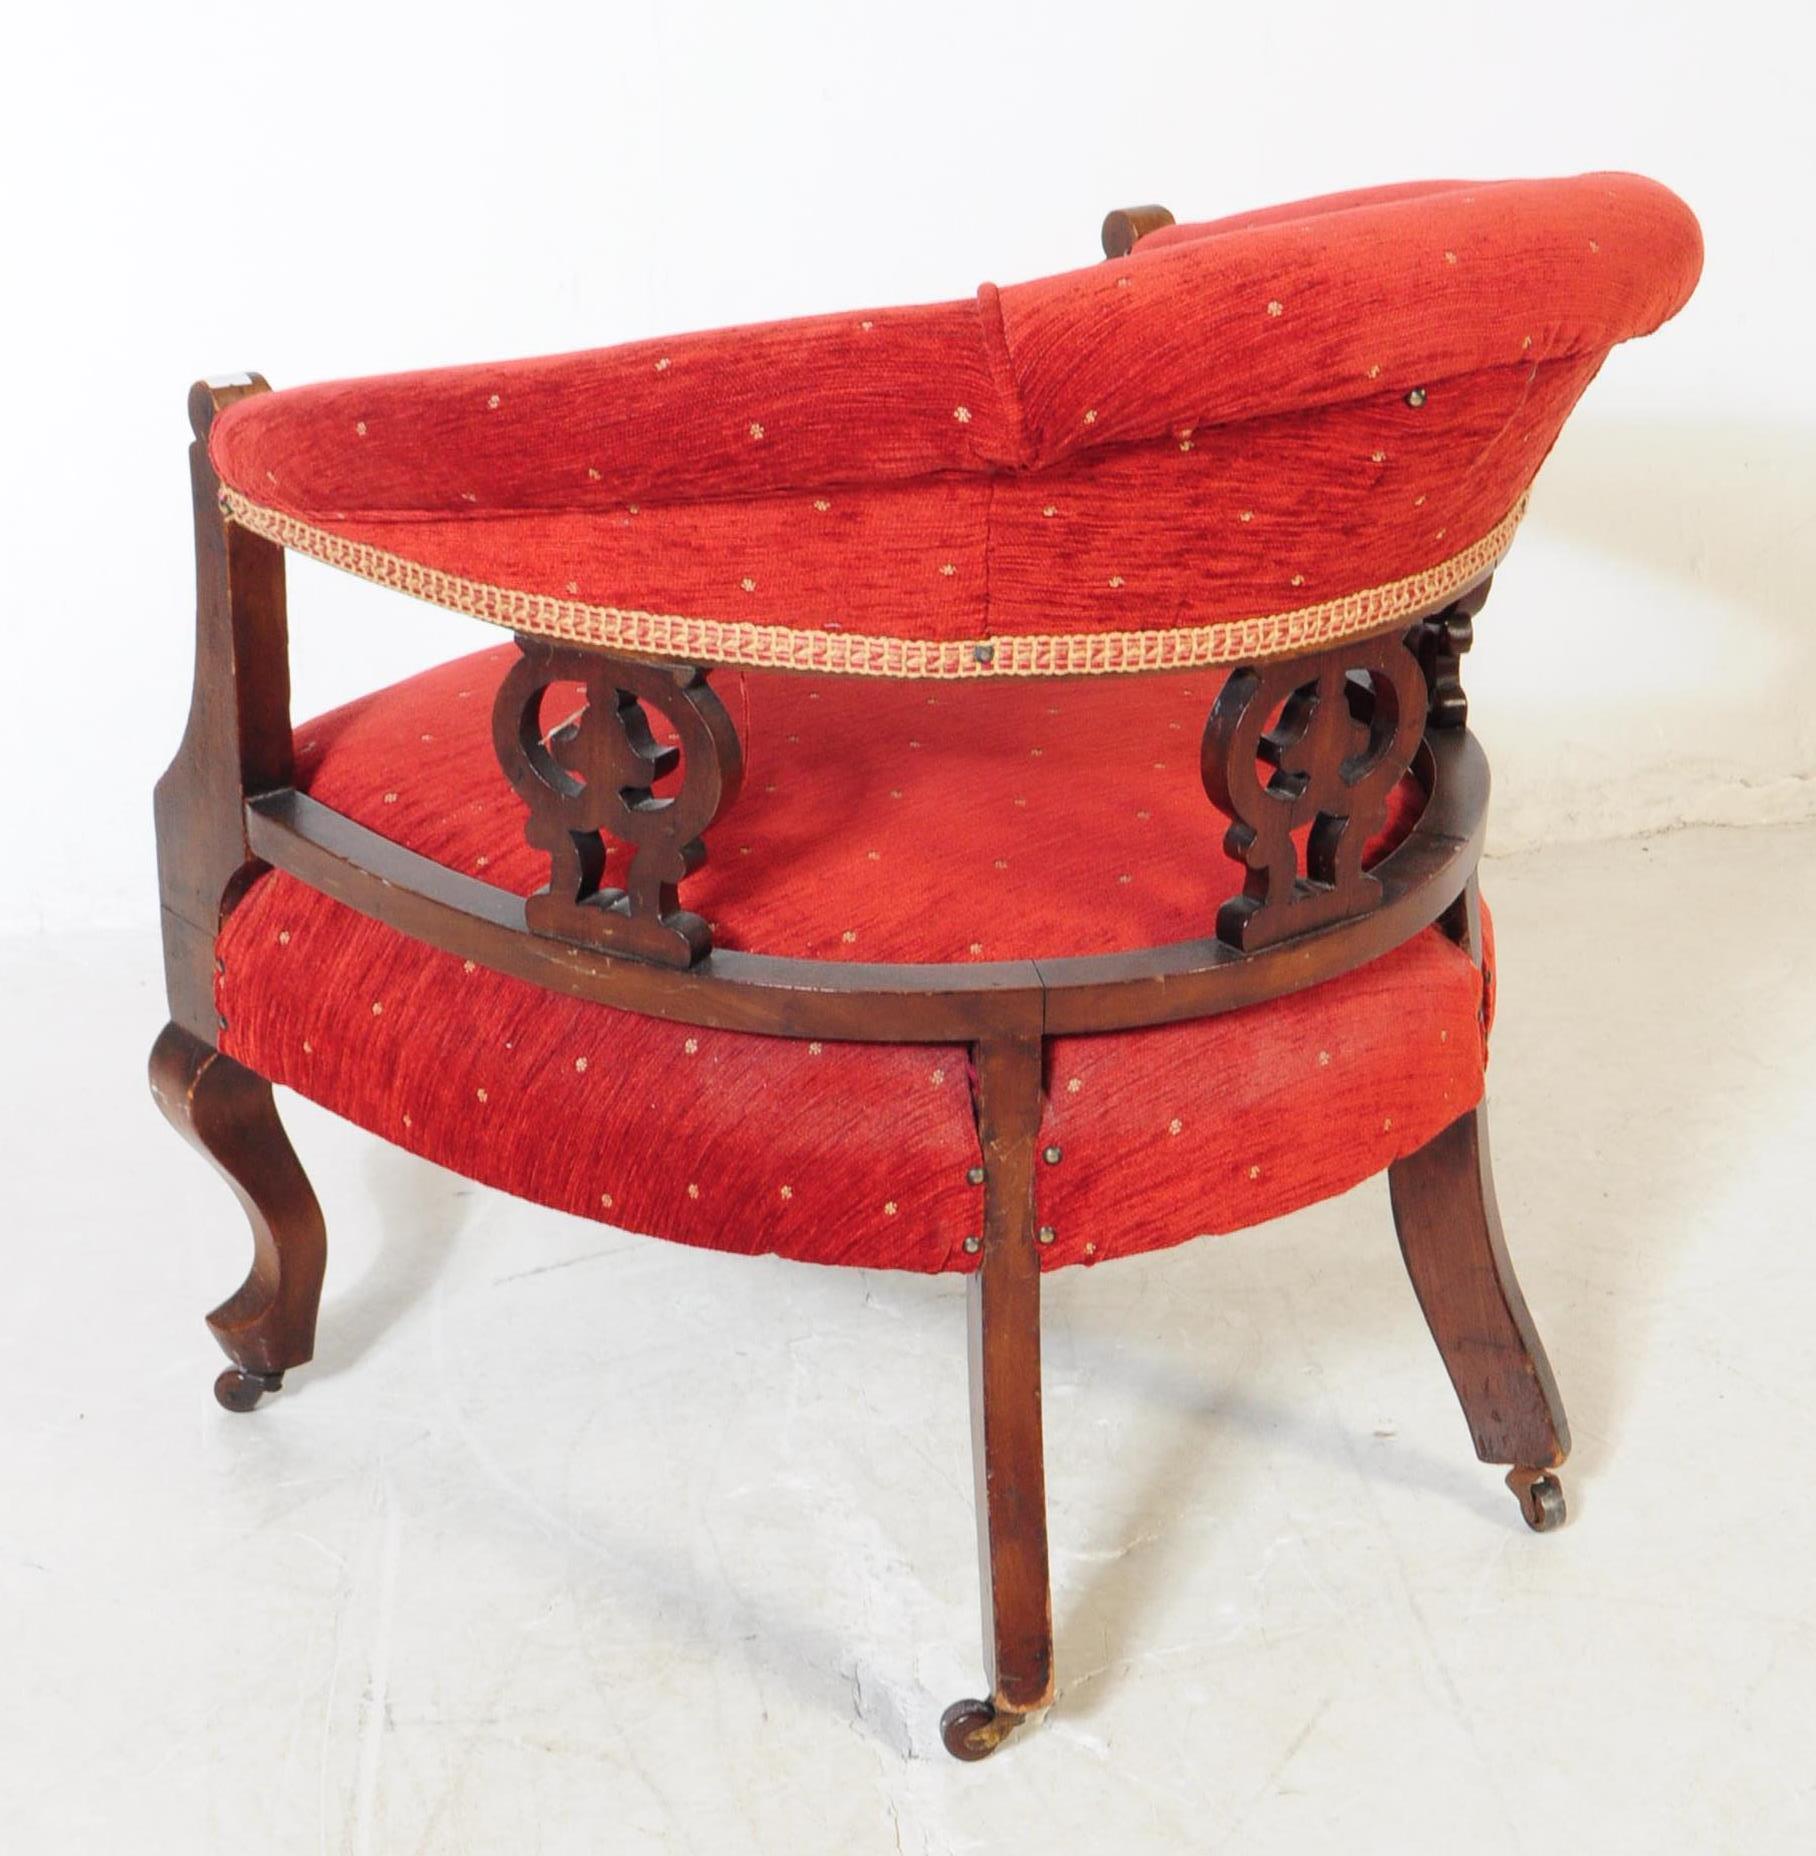 EDWARDIAN ASH UPHOLSTERED SMOKERS BOW ARMCHAIR - Image 3 of 3